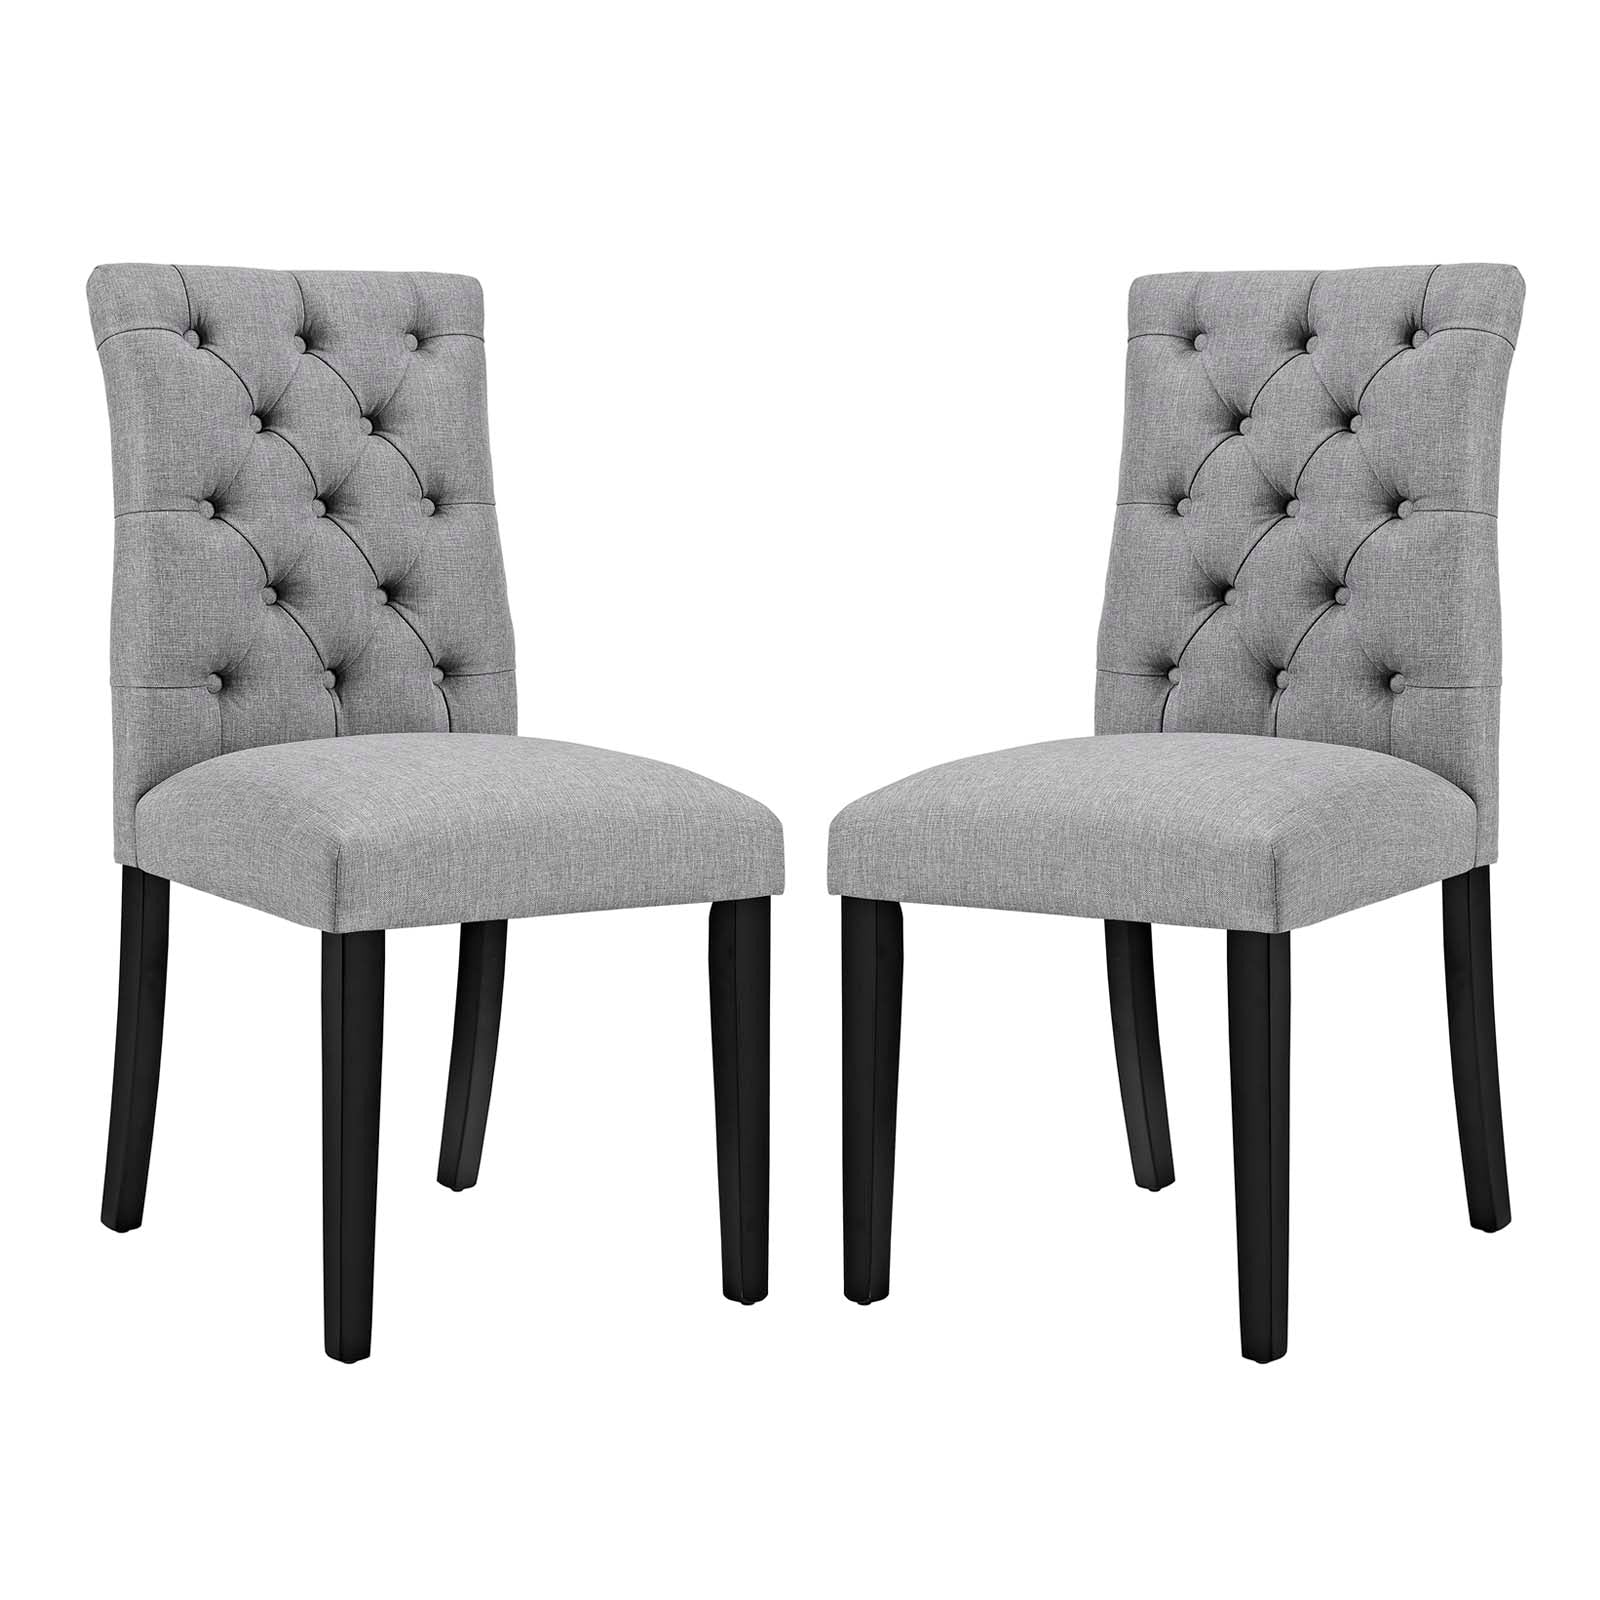 Modway Dining Chairs - Duchess Dining Chair Fabric Light Gray (Set of 2)